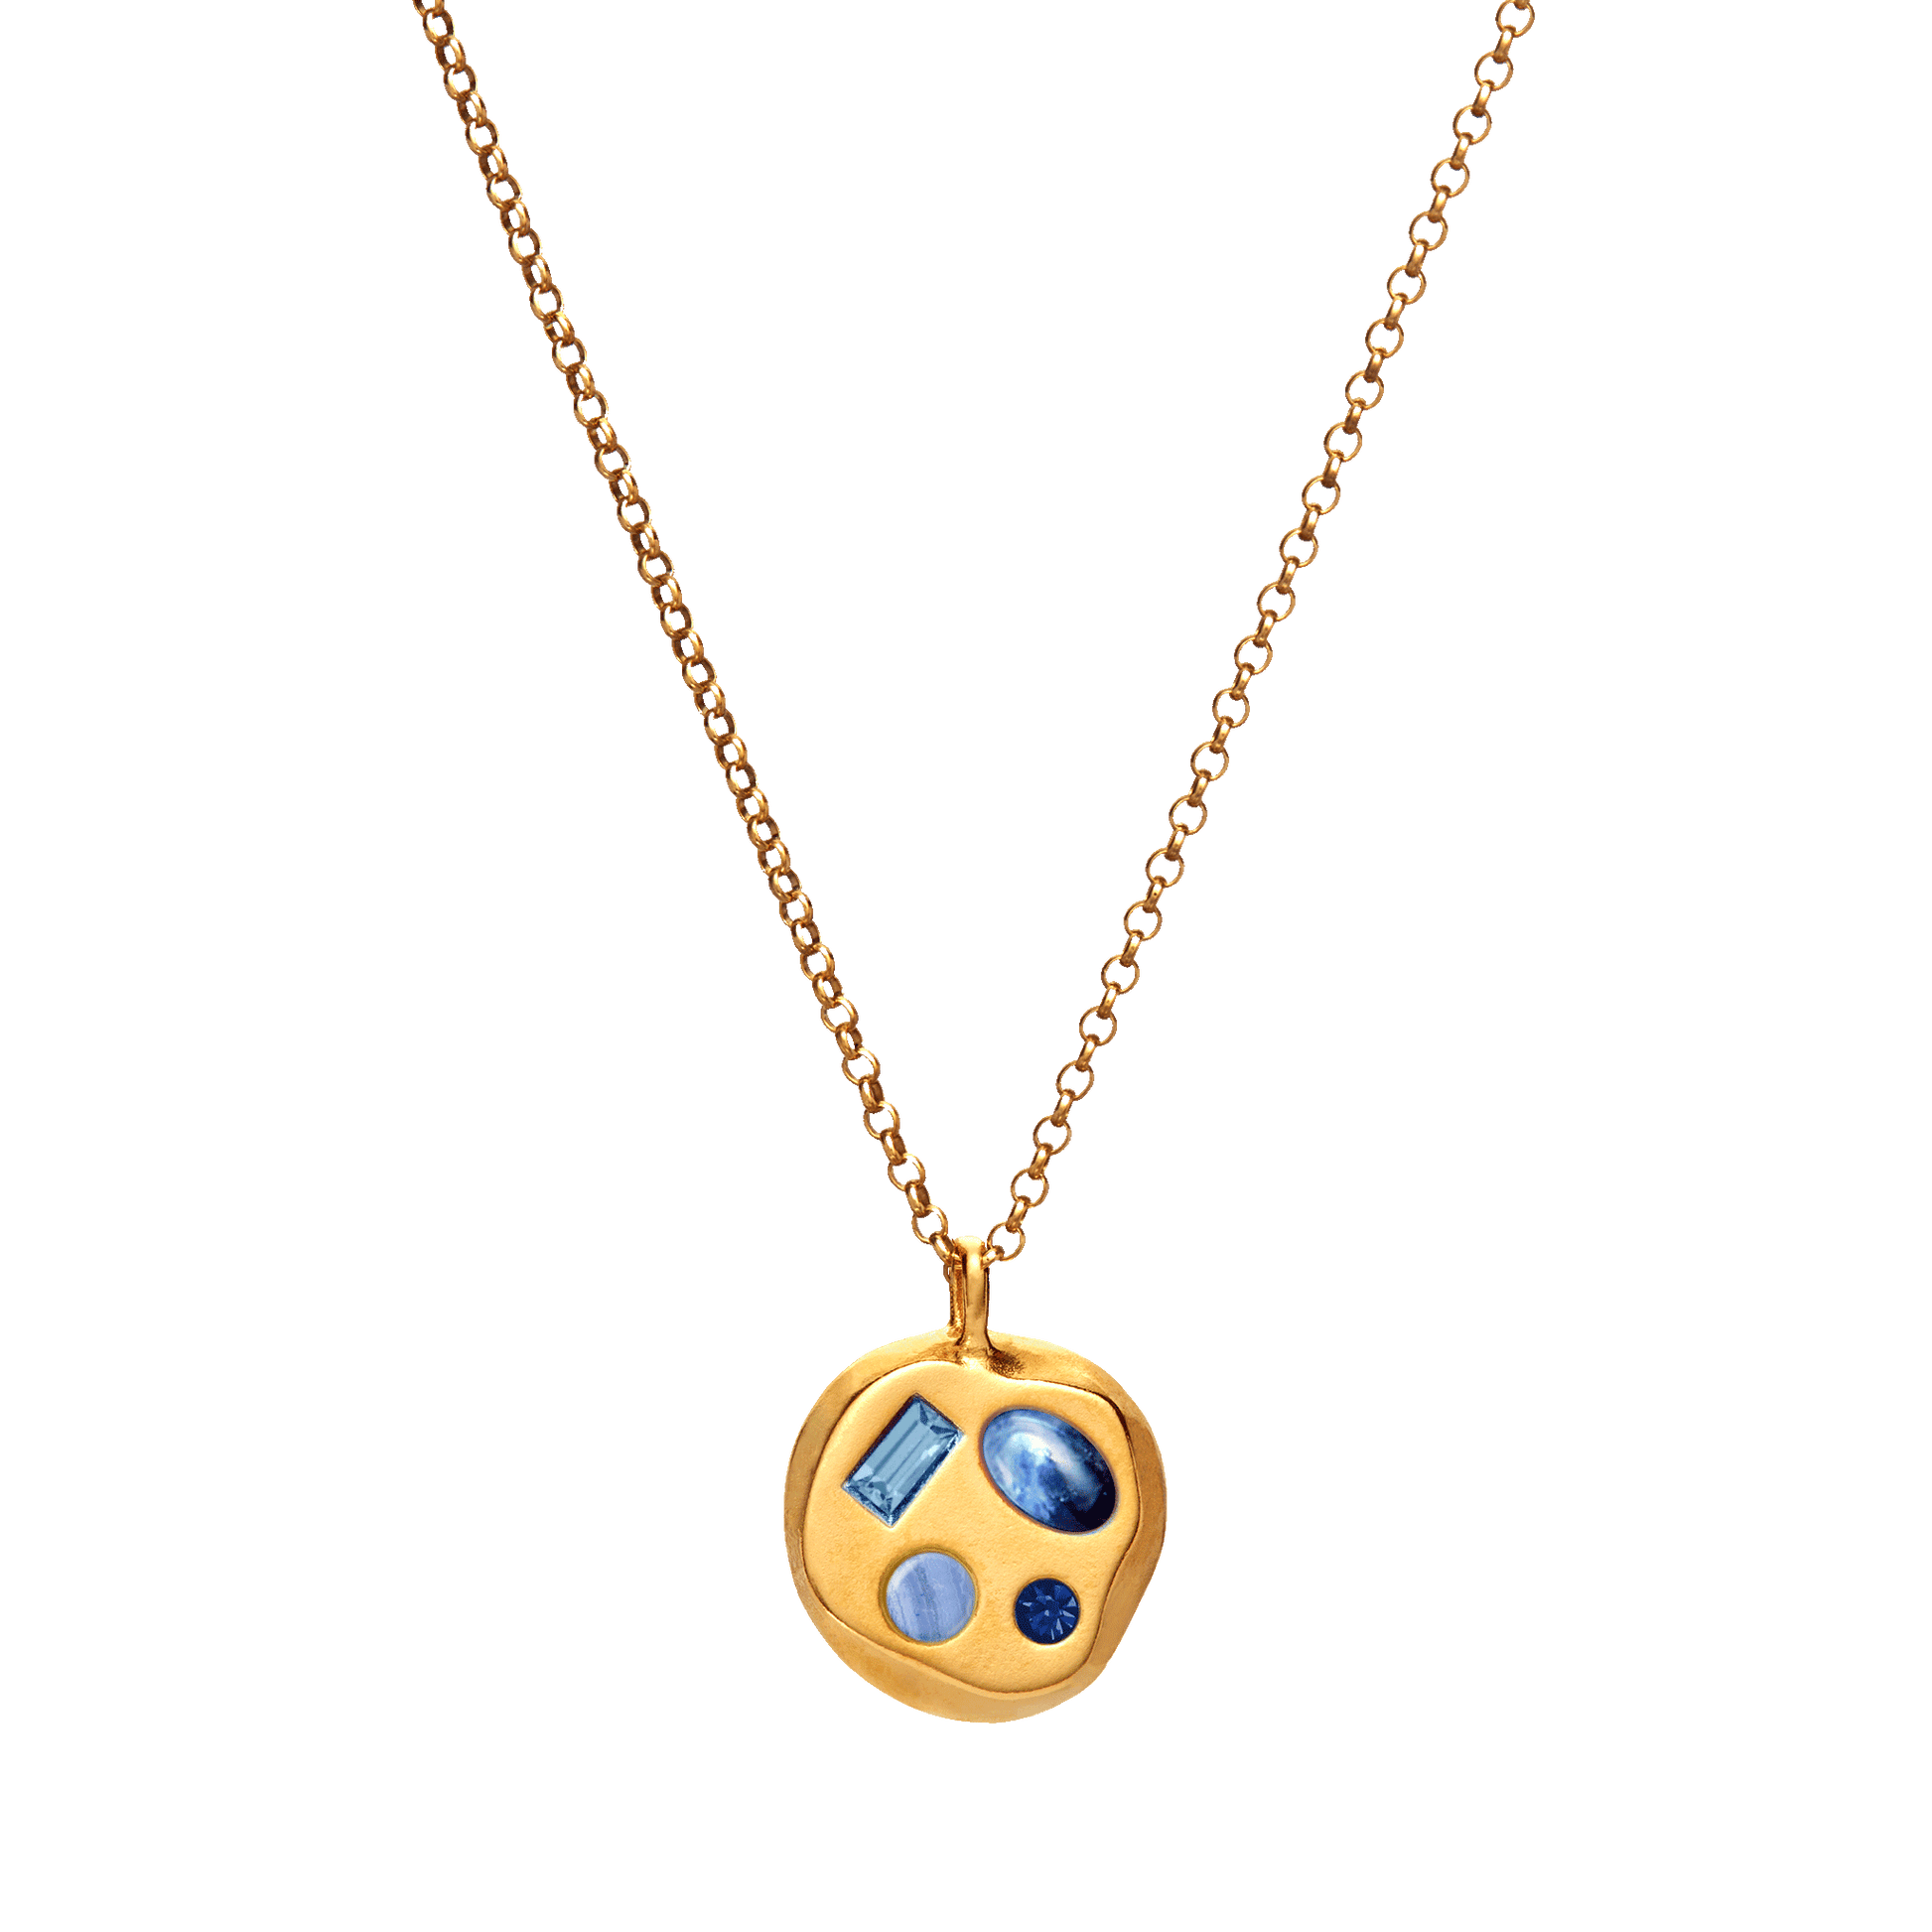 The March Fourteenth Pendant